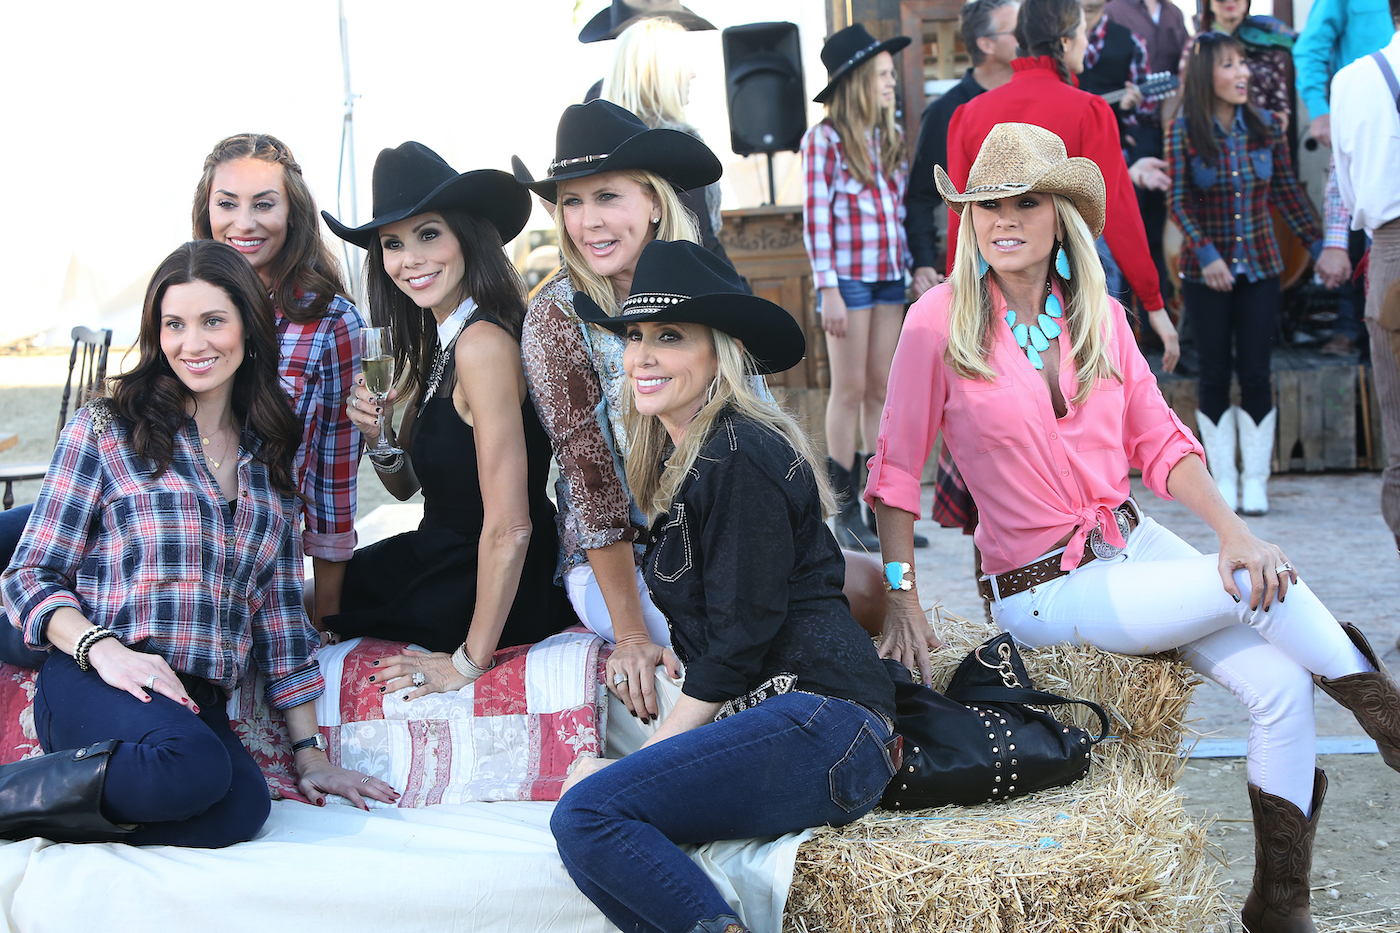 Danielle Gregorio, Lizzie Rovsek, Heather Dubrow, Vicki Gunvalson, Shannon Beador, Tamra Judge sit on large bales of hay and wear cowboy hats on 'RHOC'